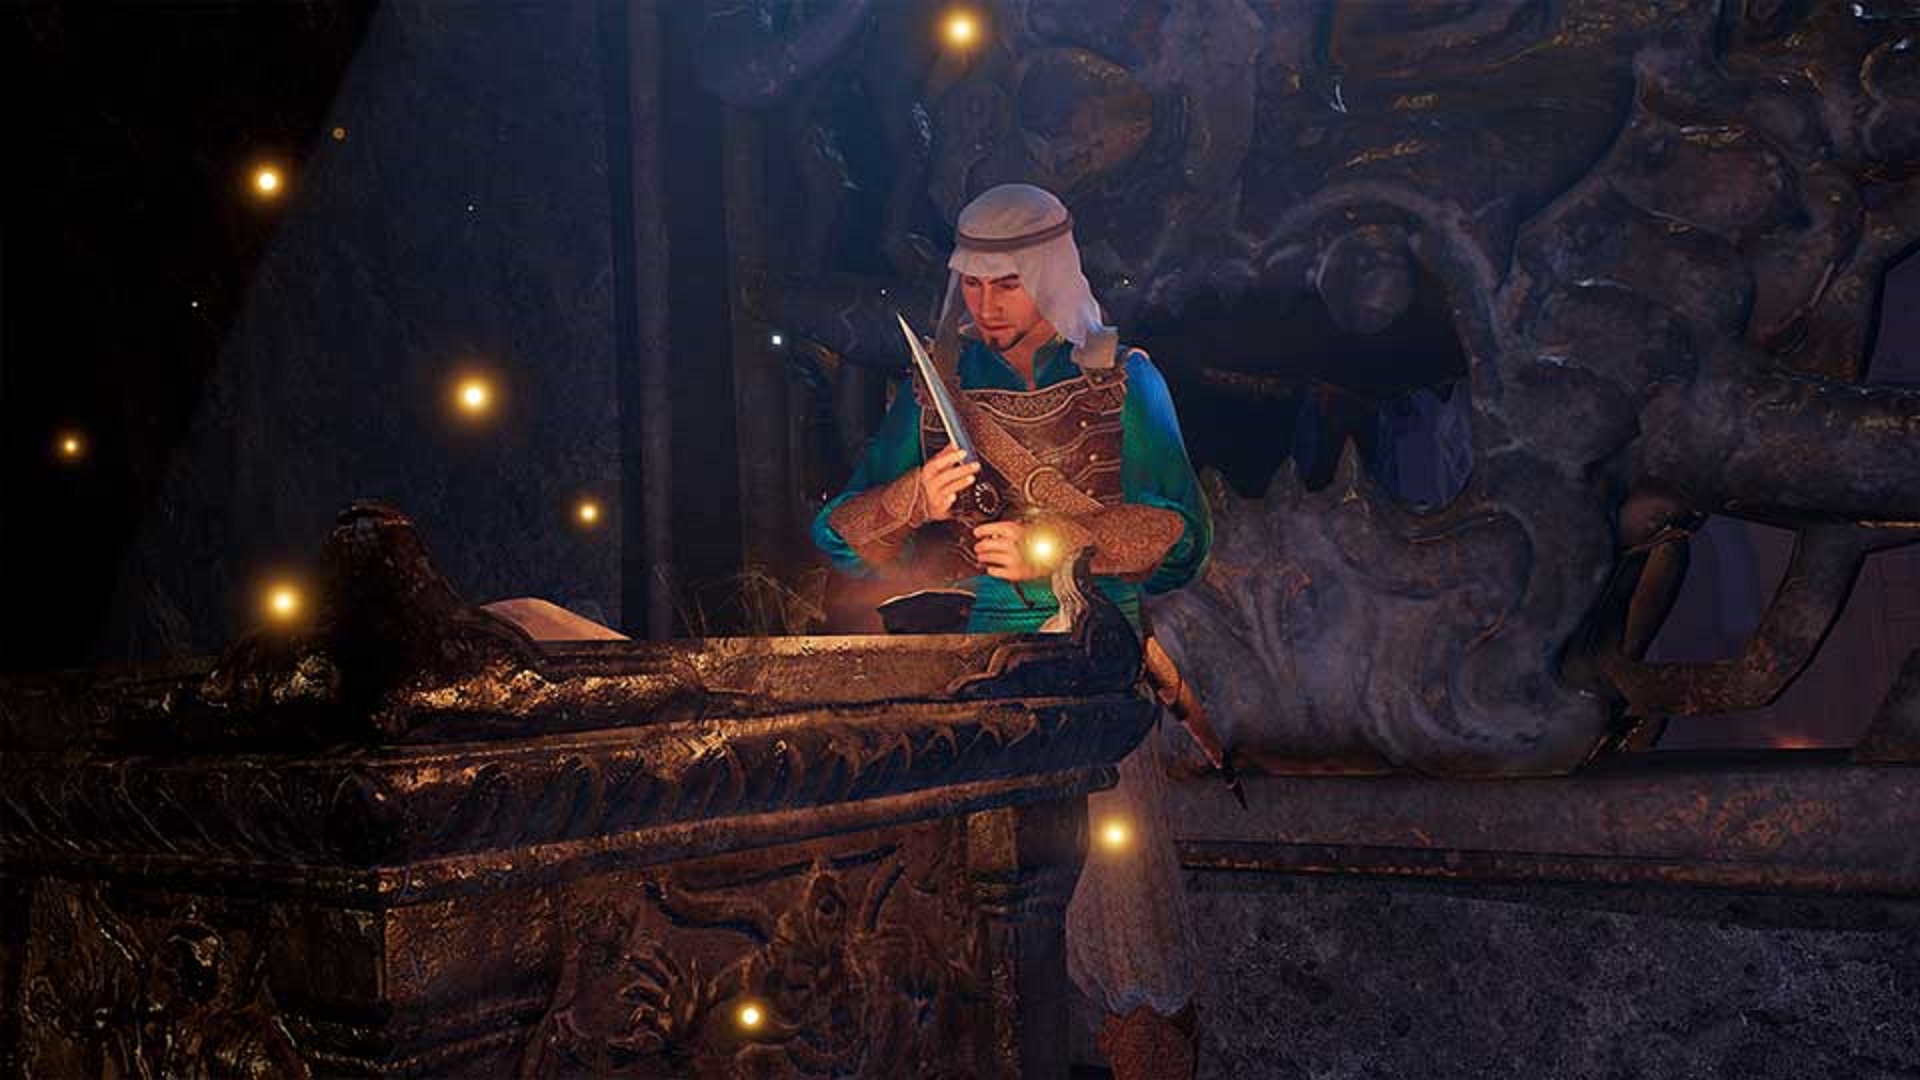 Prince of Persia Sands of Time Remake Image 6